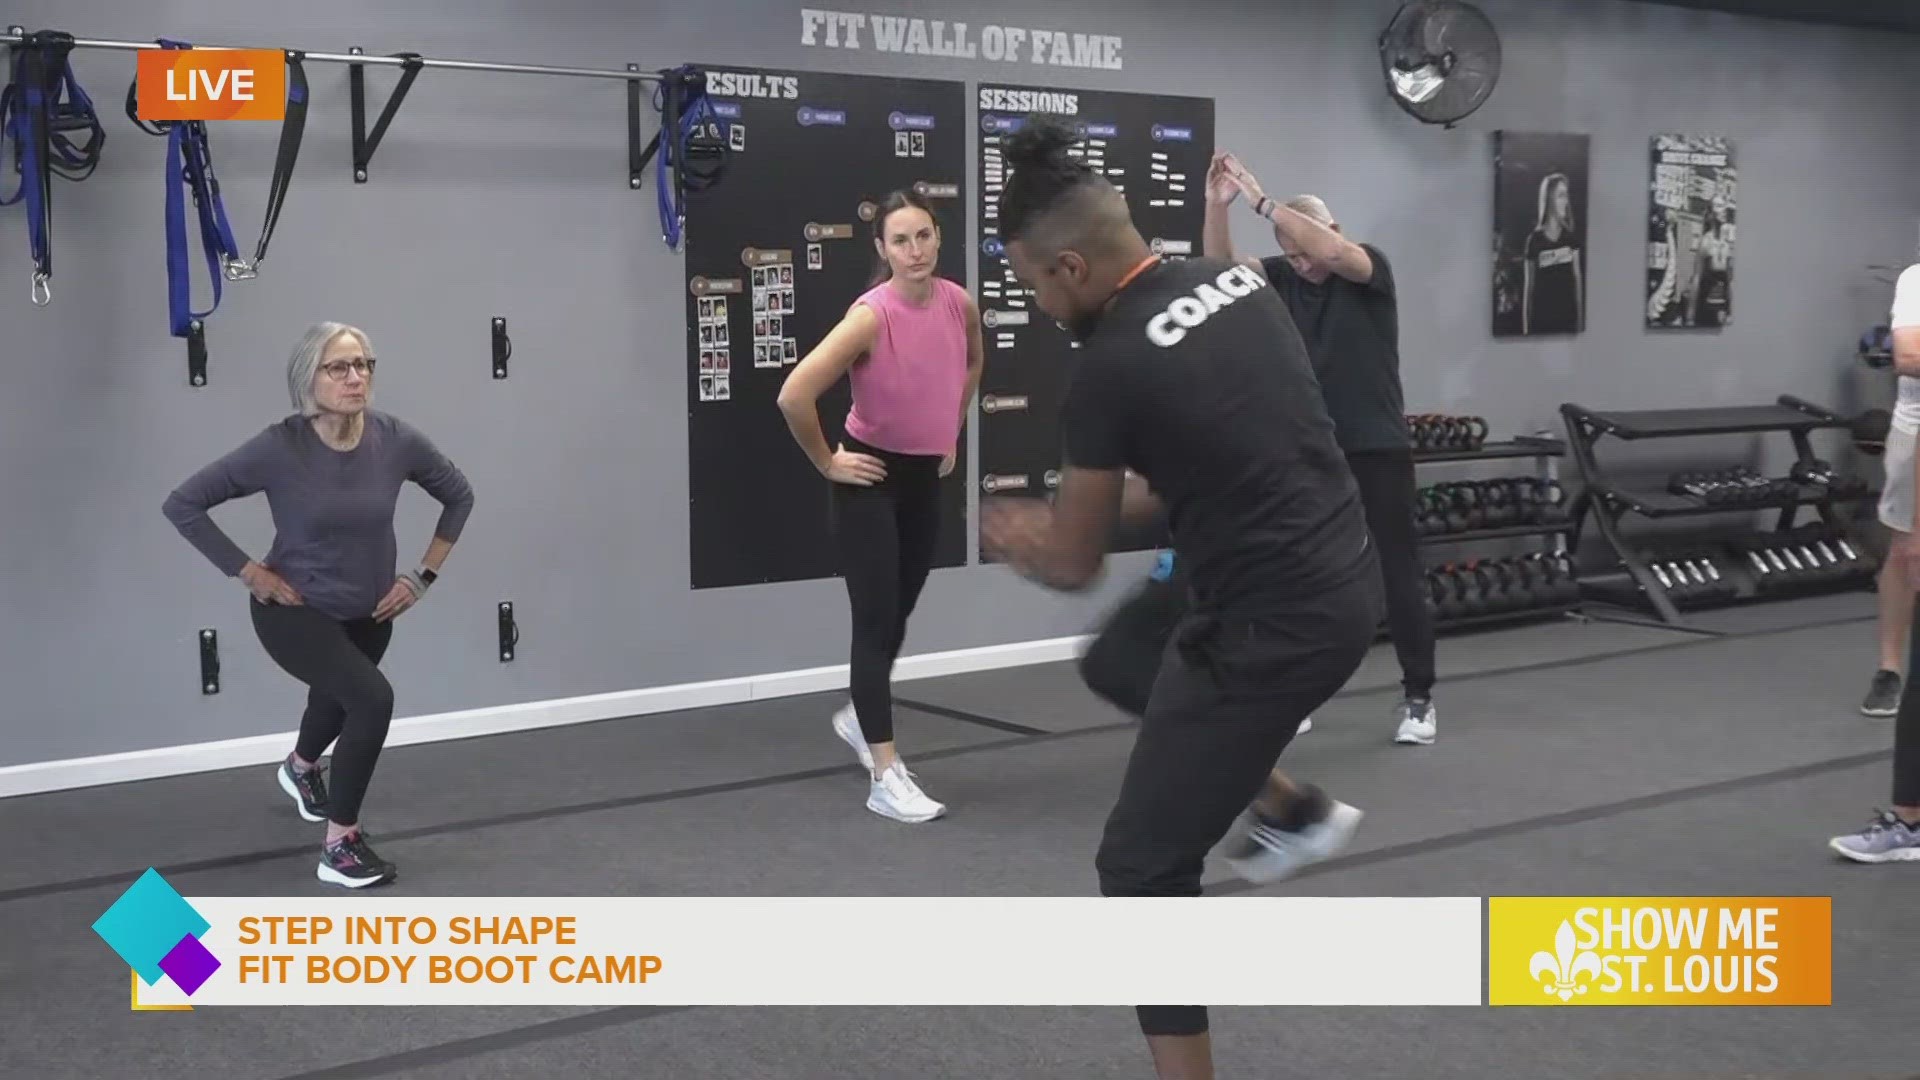 Fit Body Boot Camp coaches are trying to raise $10,000 and one million steps per coach is the goal to reach by March 31 to raise awareness to Next Step STL.